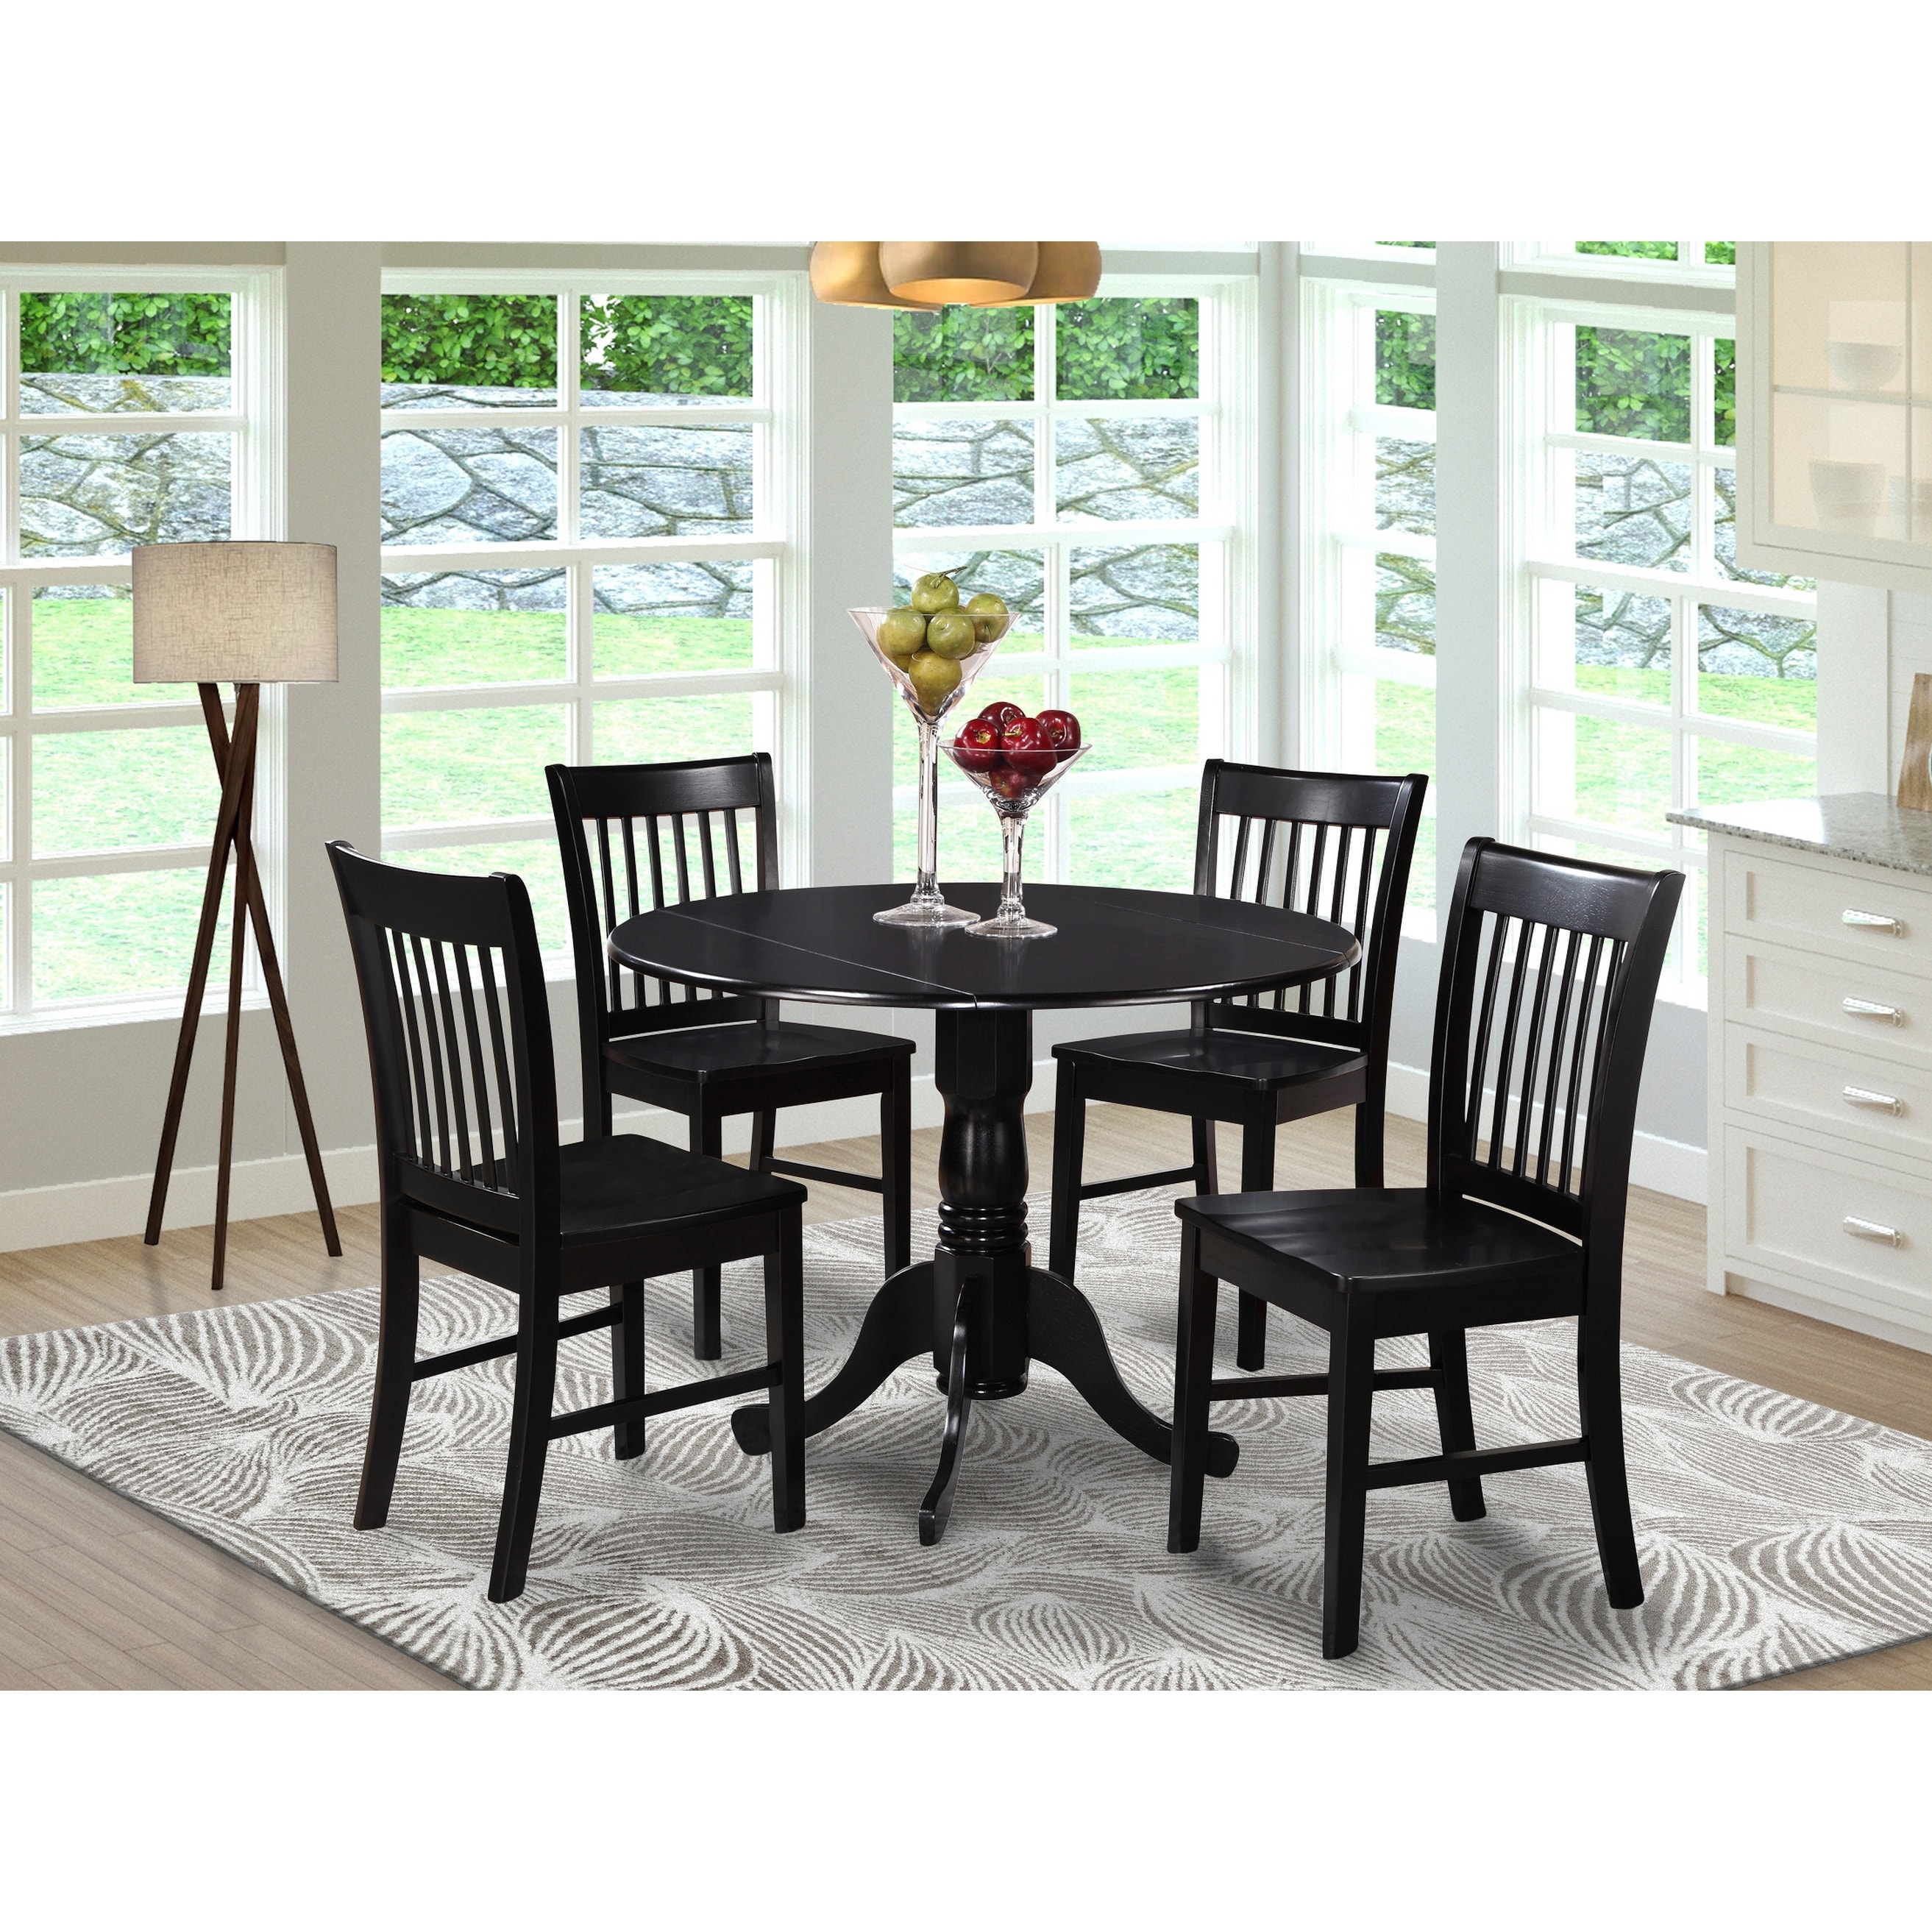 Black Round Kitchen Table And 4 Dinette Chairs 5 Piece Dining Set On Sale Overstock 10201085